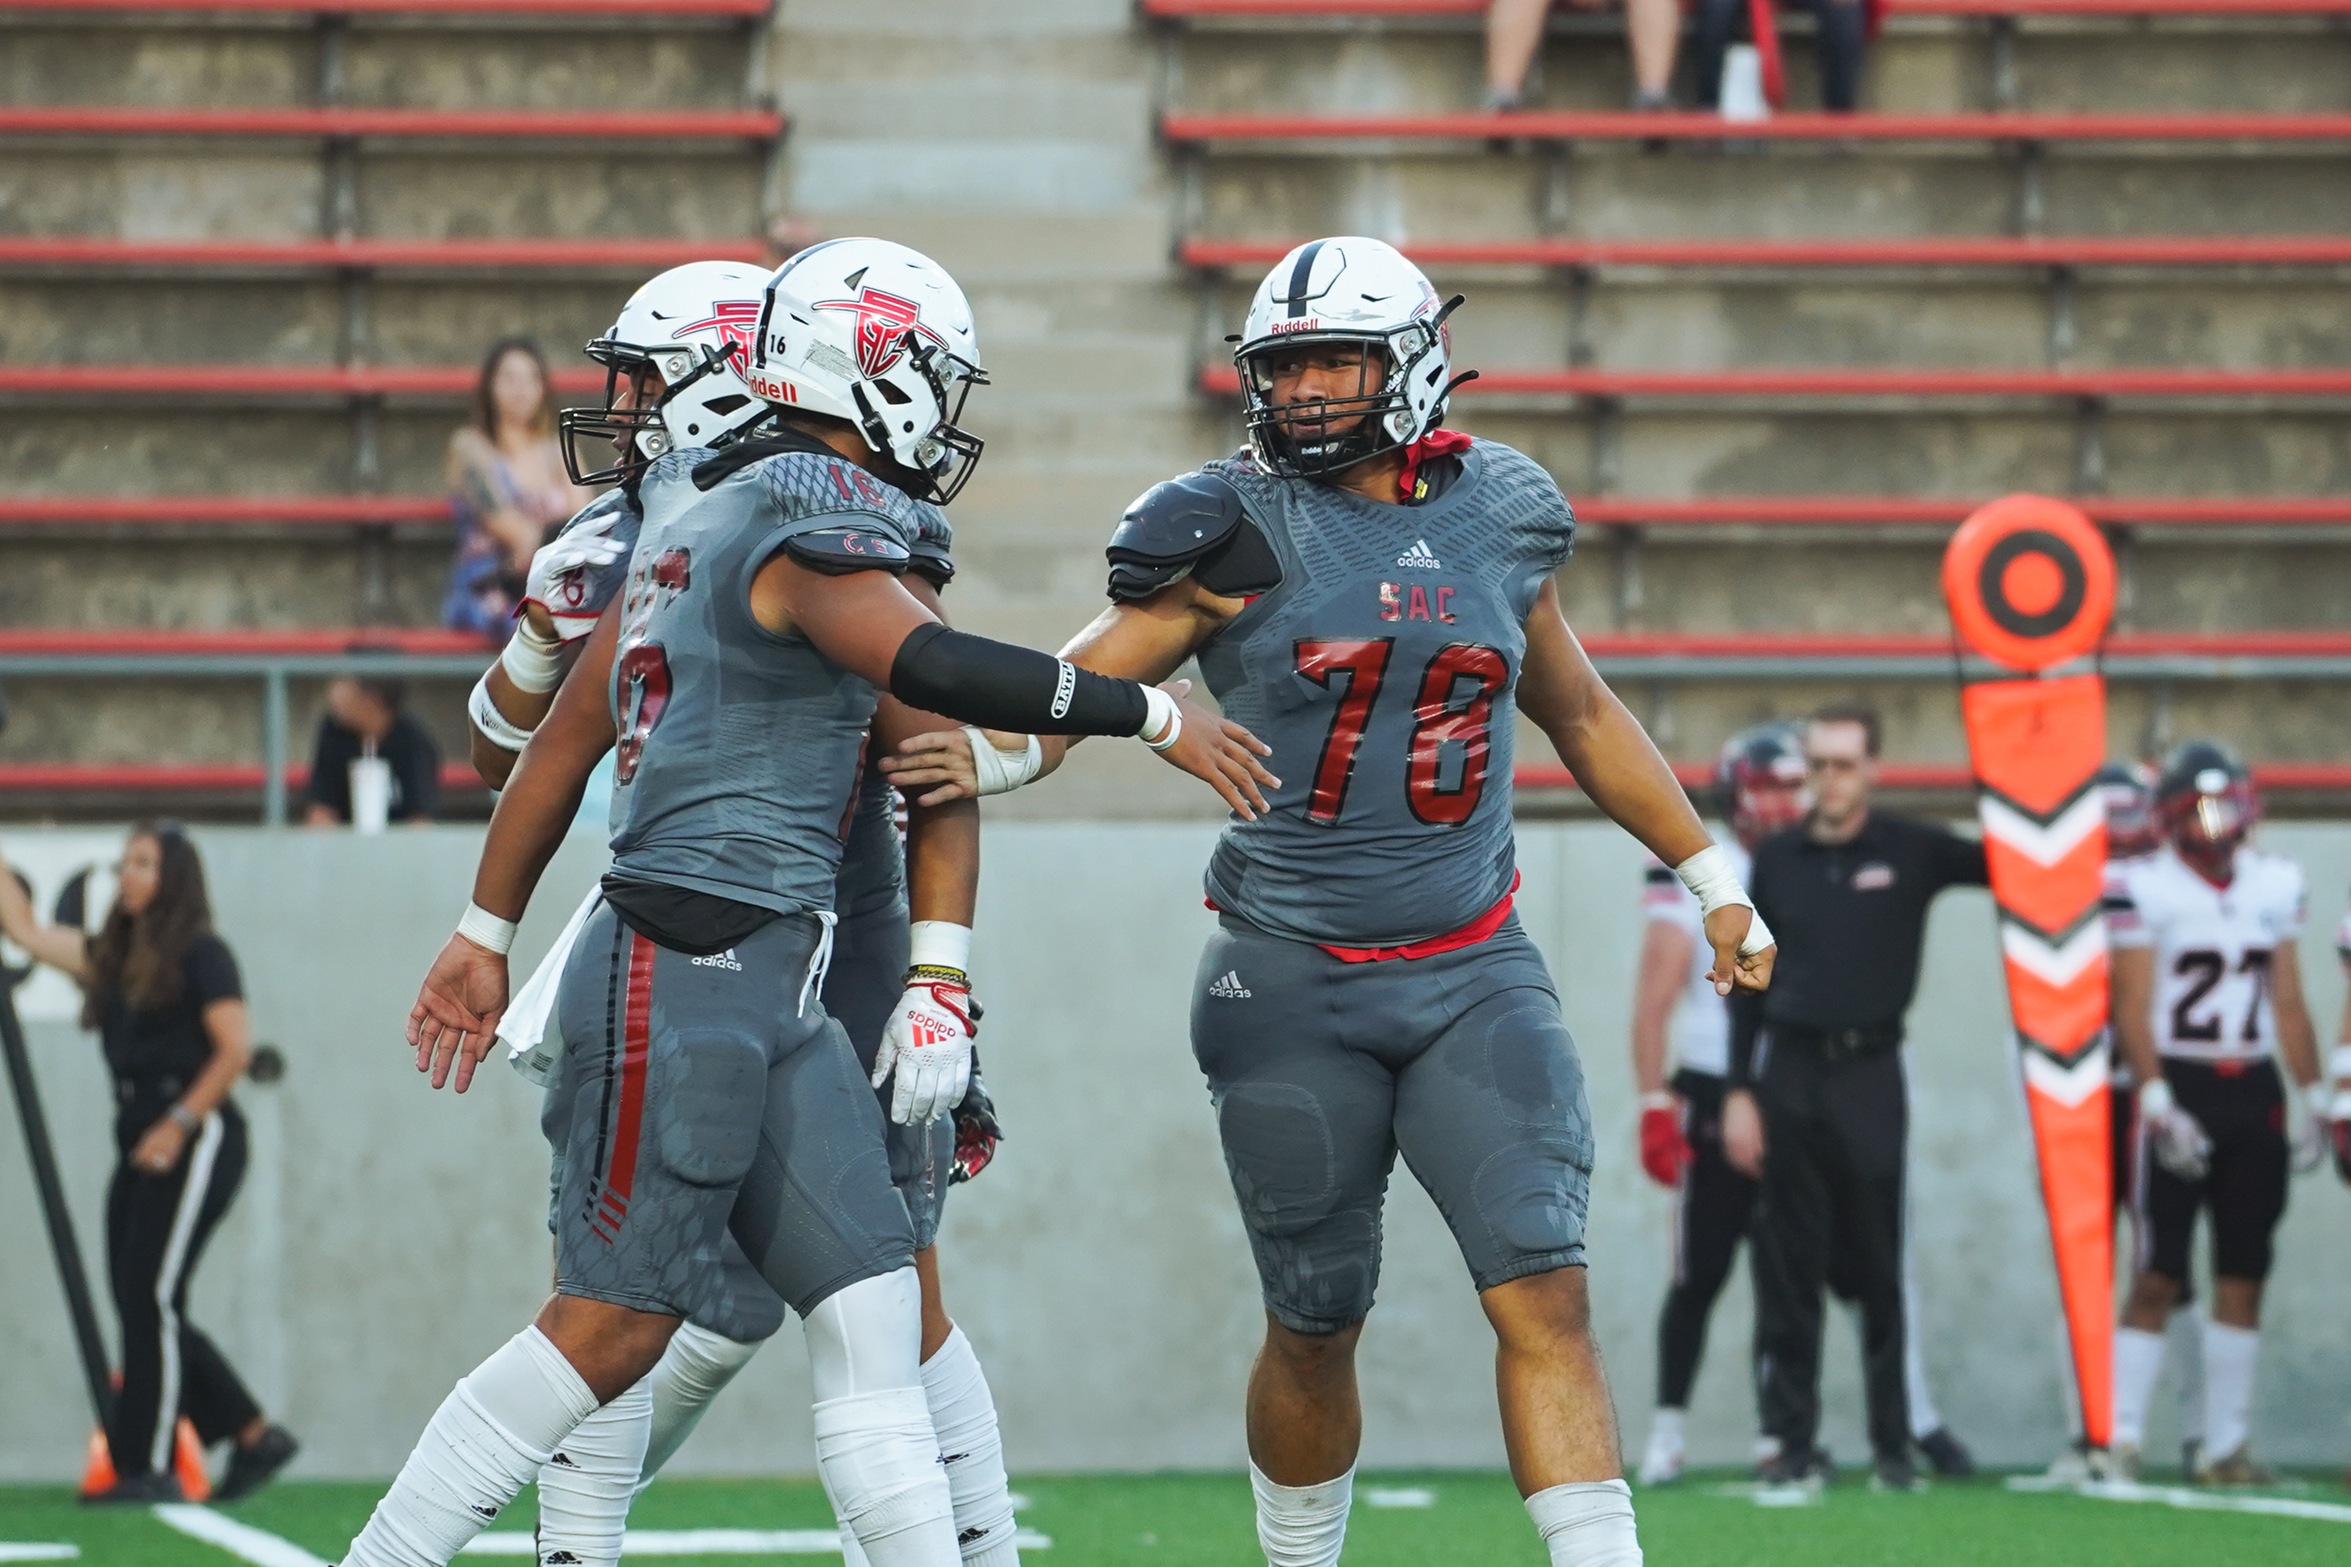 Scoreless Second Half Leads to 42-20 Loss to MSJC for Dons Football